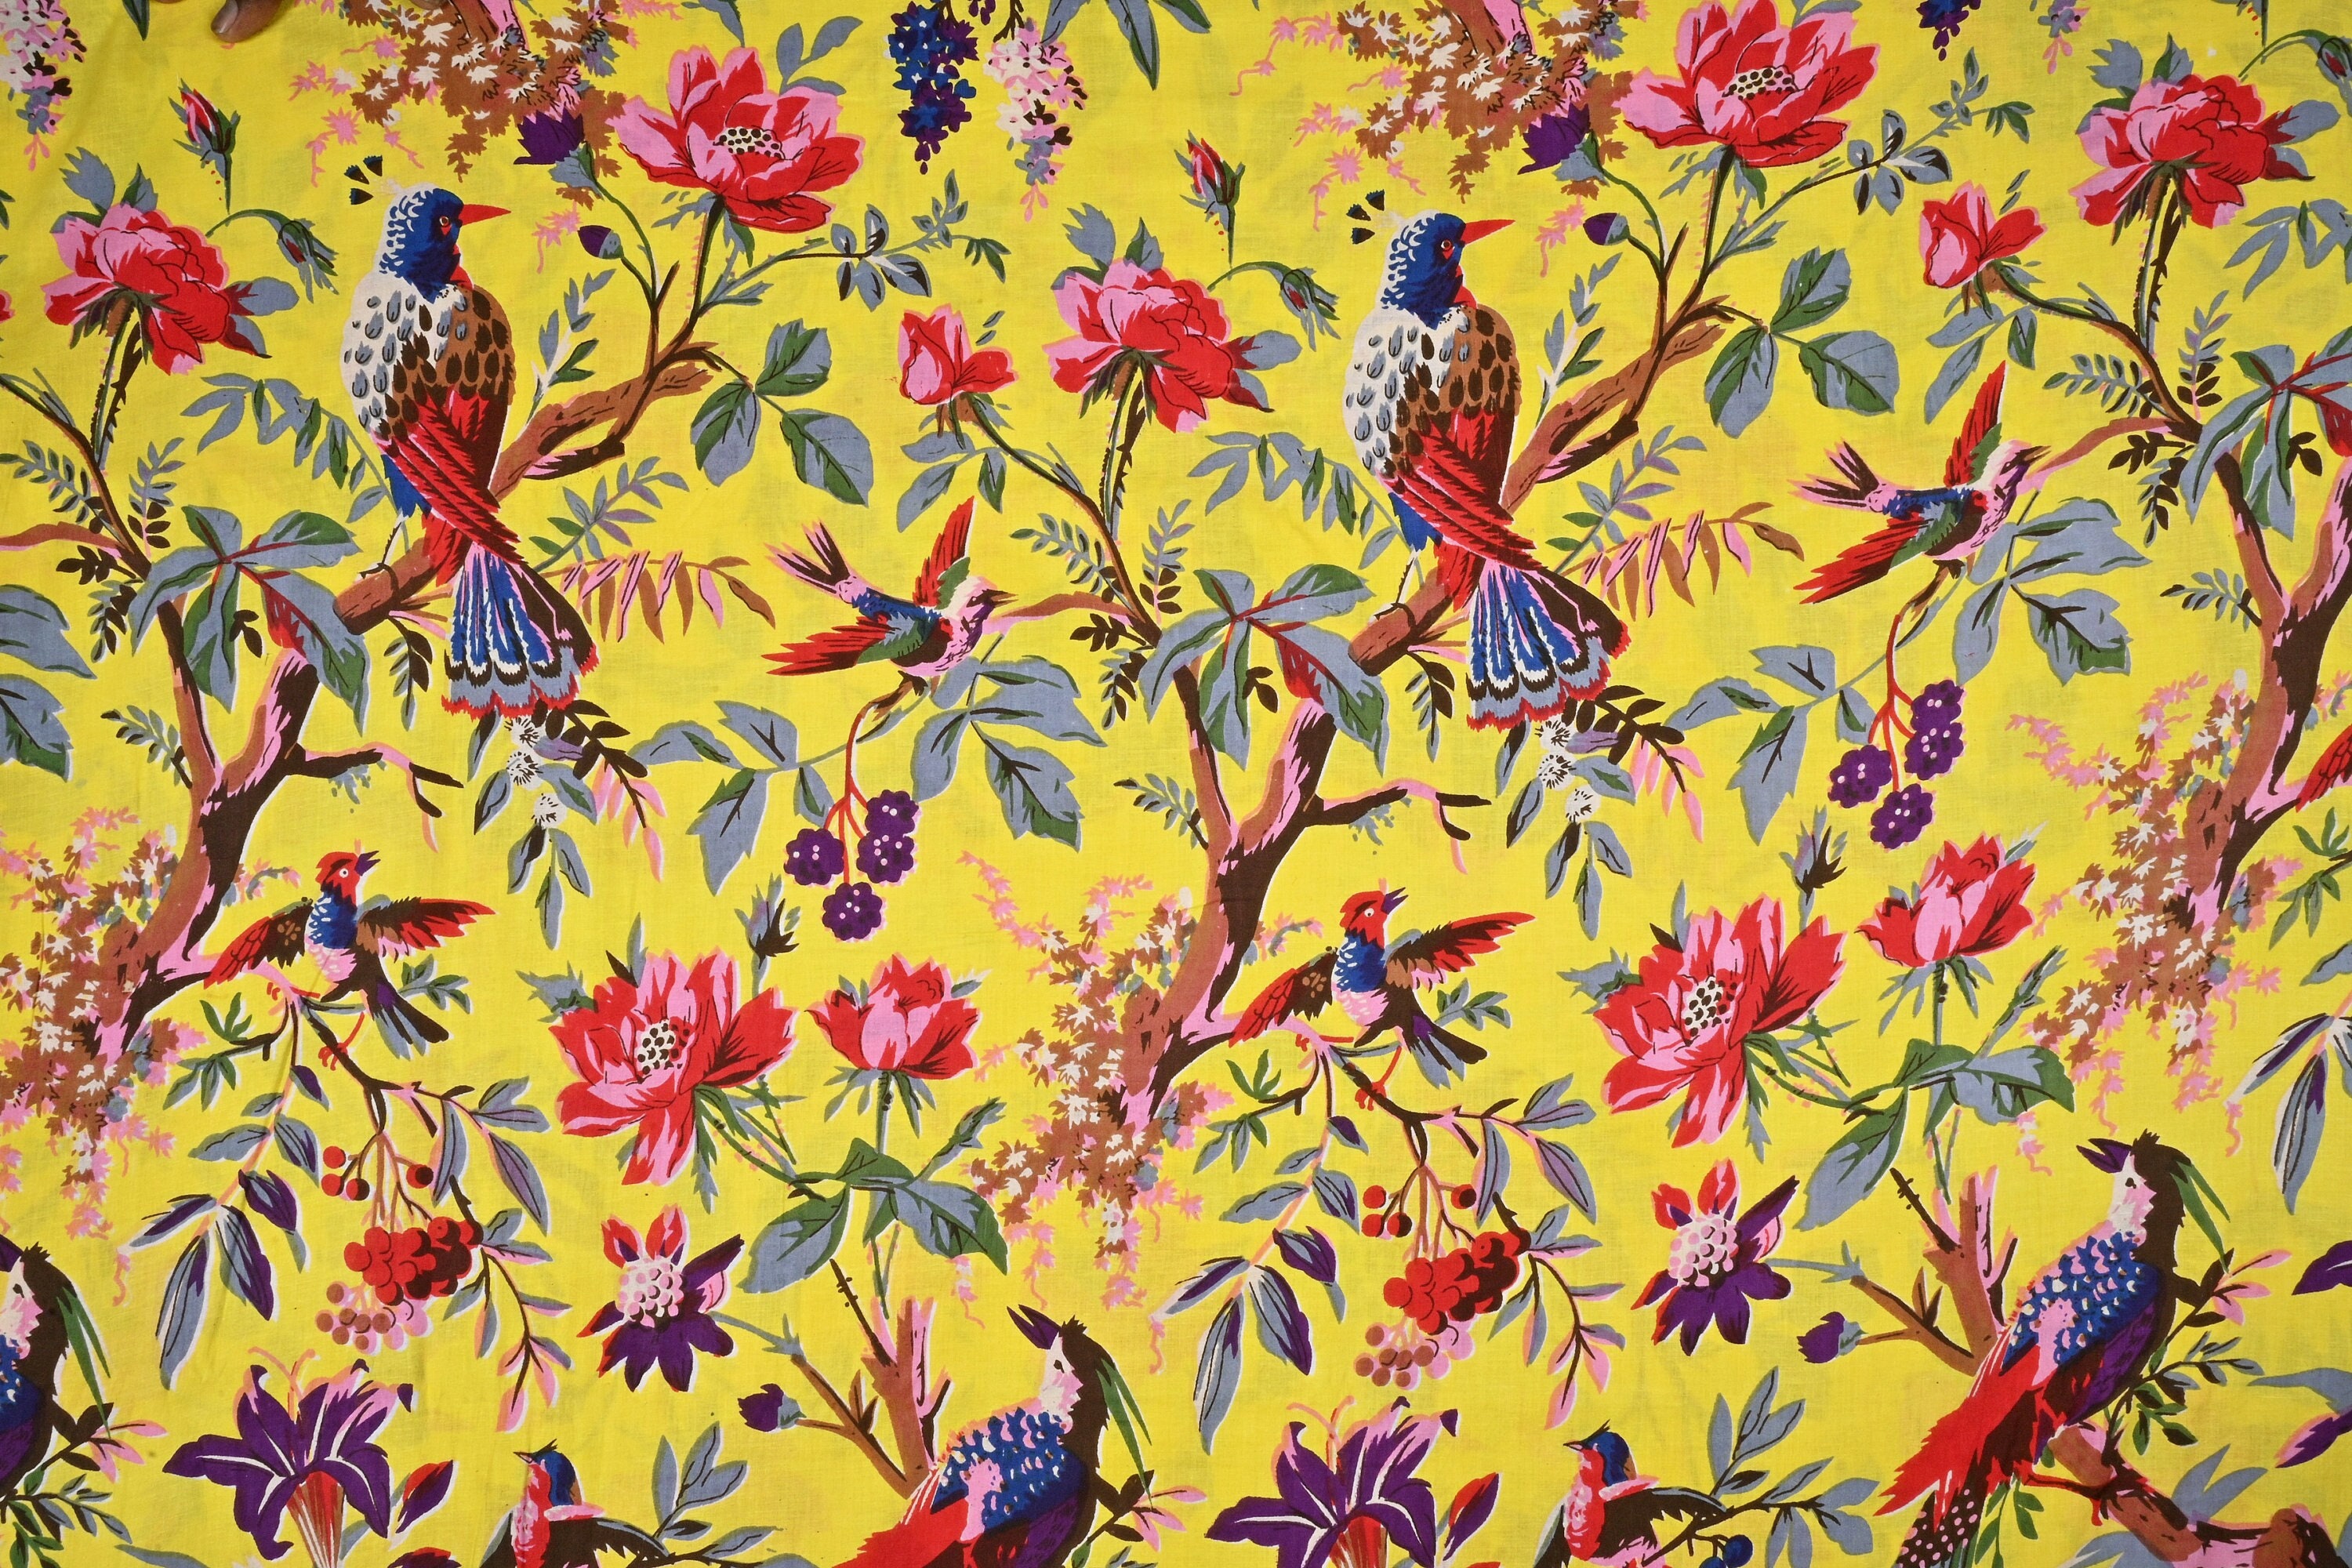 New Bird Print Fabric Indian Soft Cotton Fabric by the Yard 